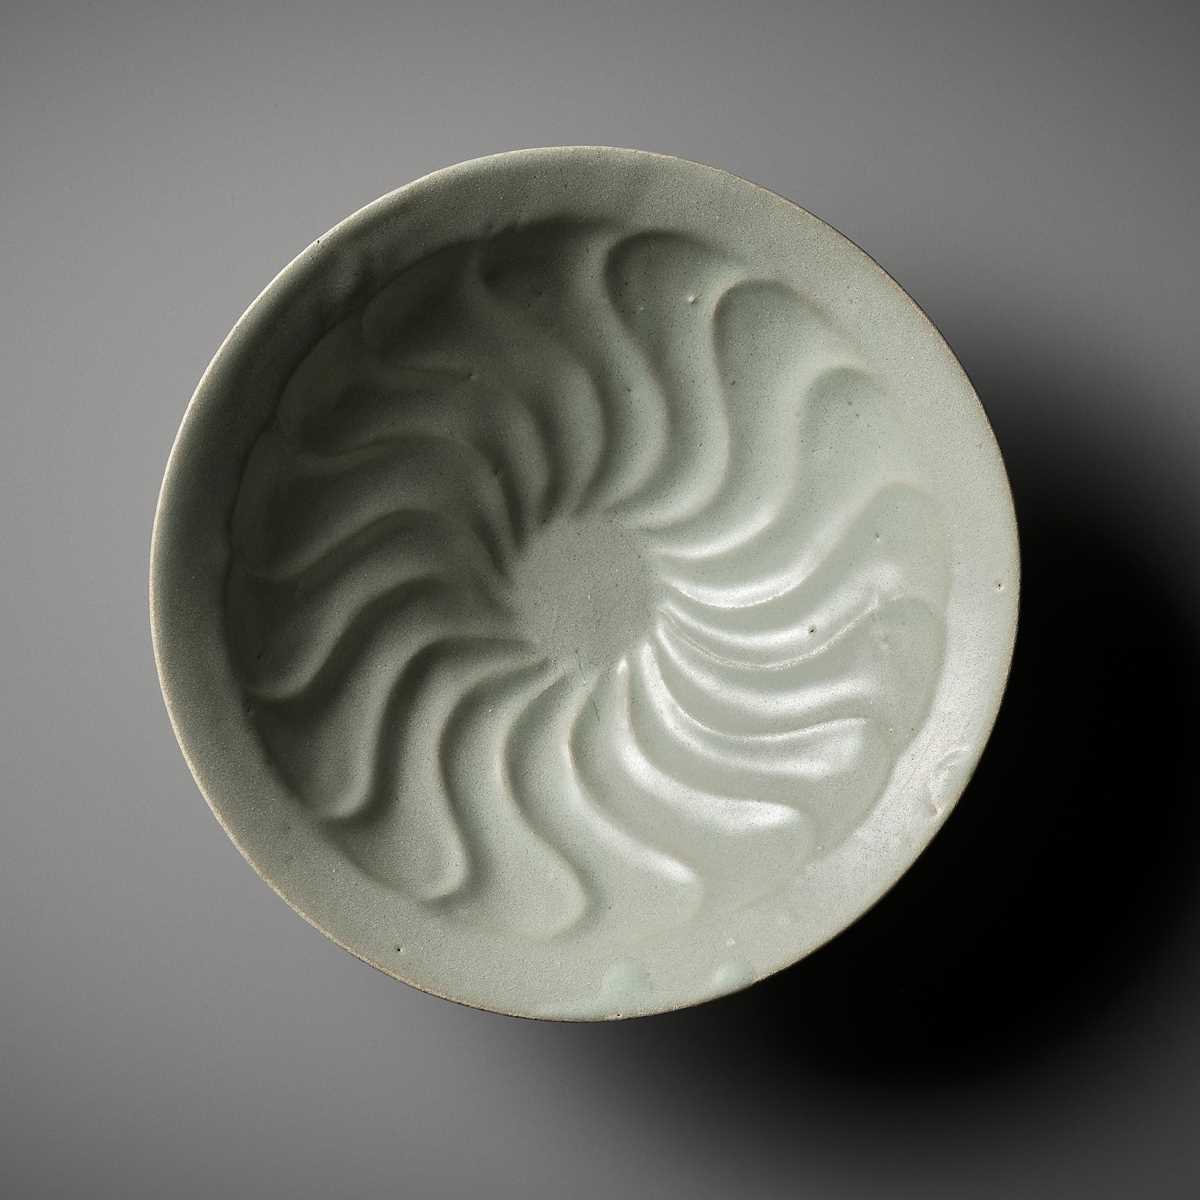 Lot 168 - A MOLDED AND CELADON-GLAZED ‘FLORAL’ BOWL, GORYEO DYNASTY, KOREA, 14TH CENTURY